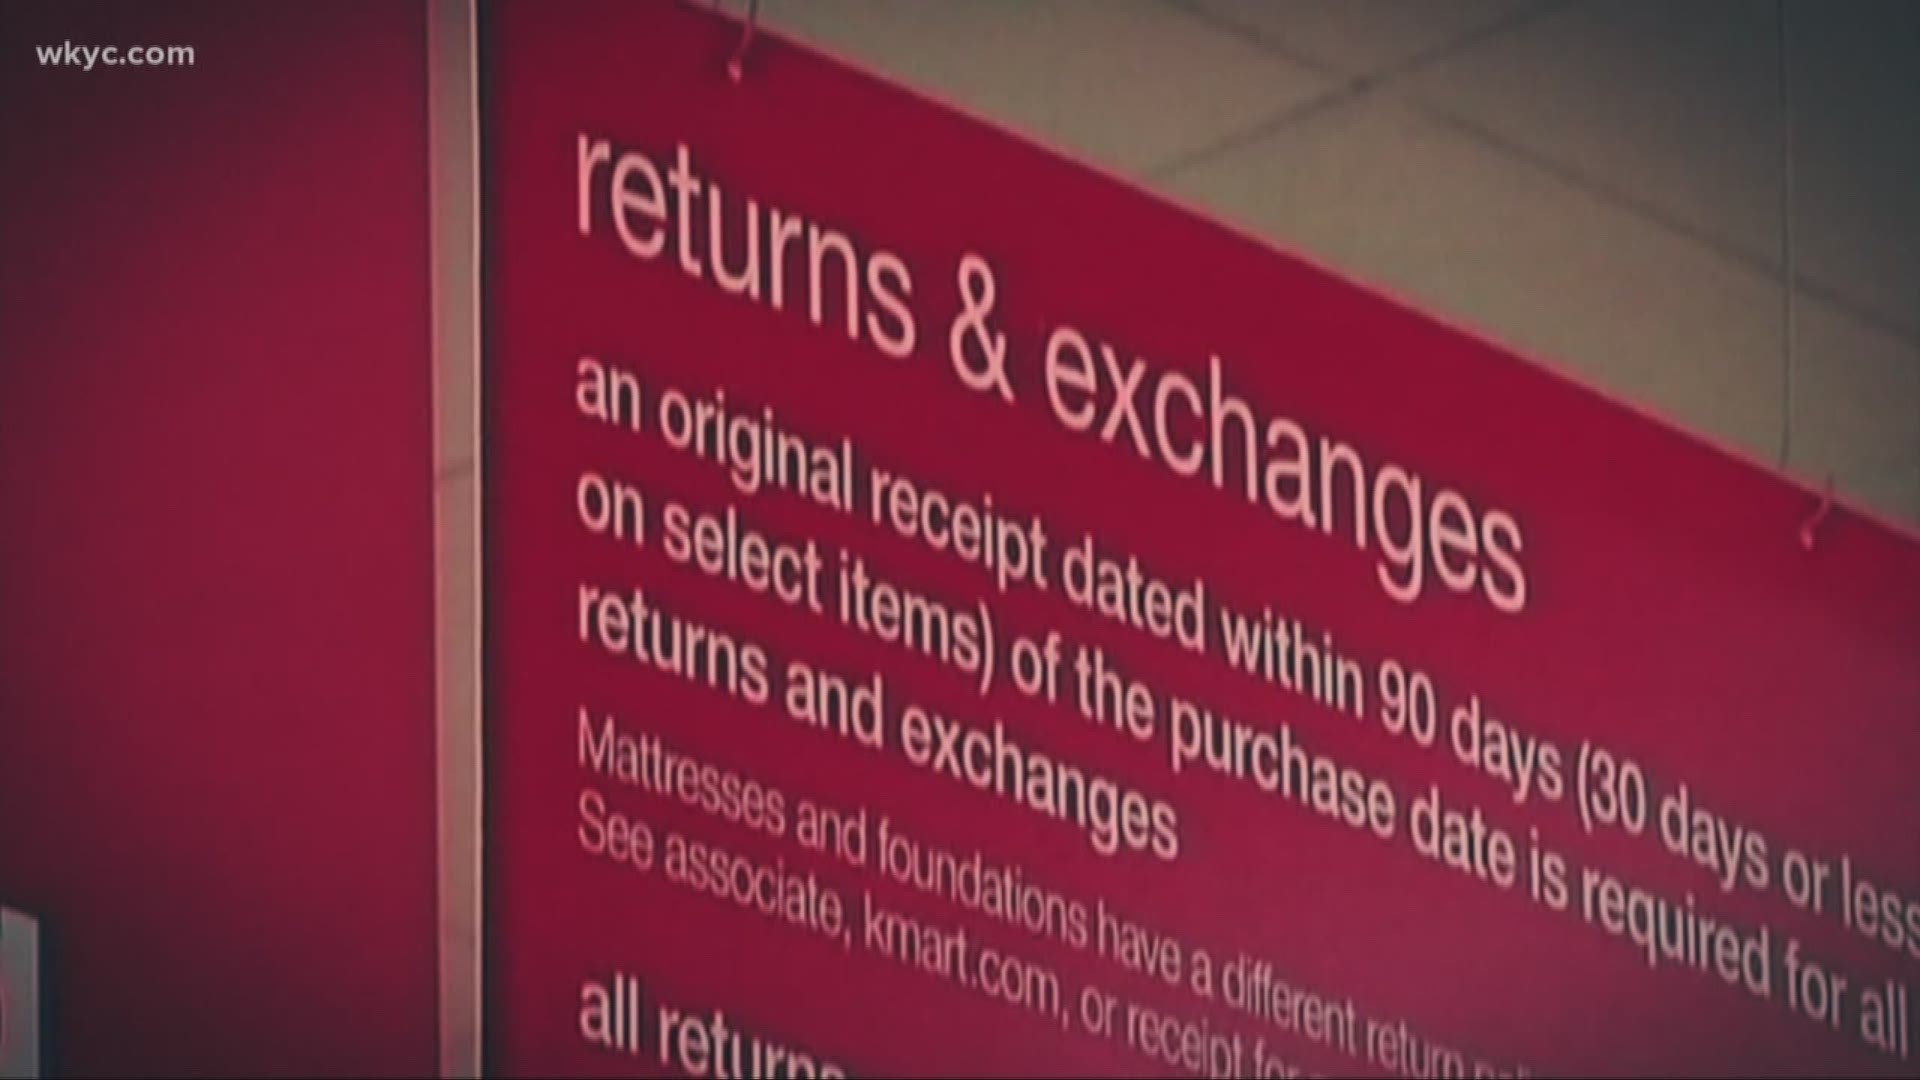 Retailers are cracking down on customers that have taken advantages of return policies. Ohio stores aren't event required to accept returns.